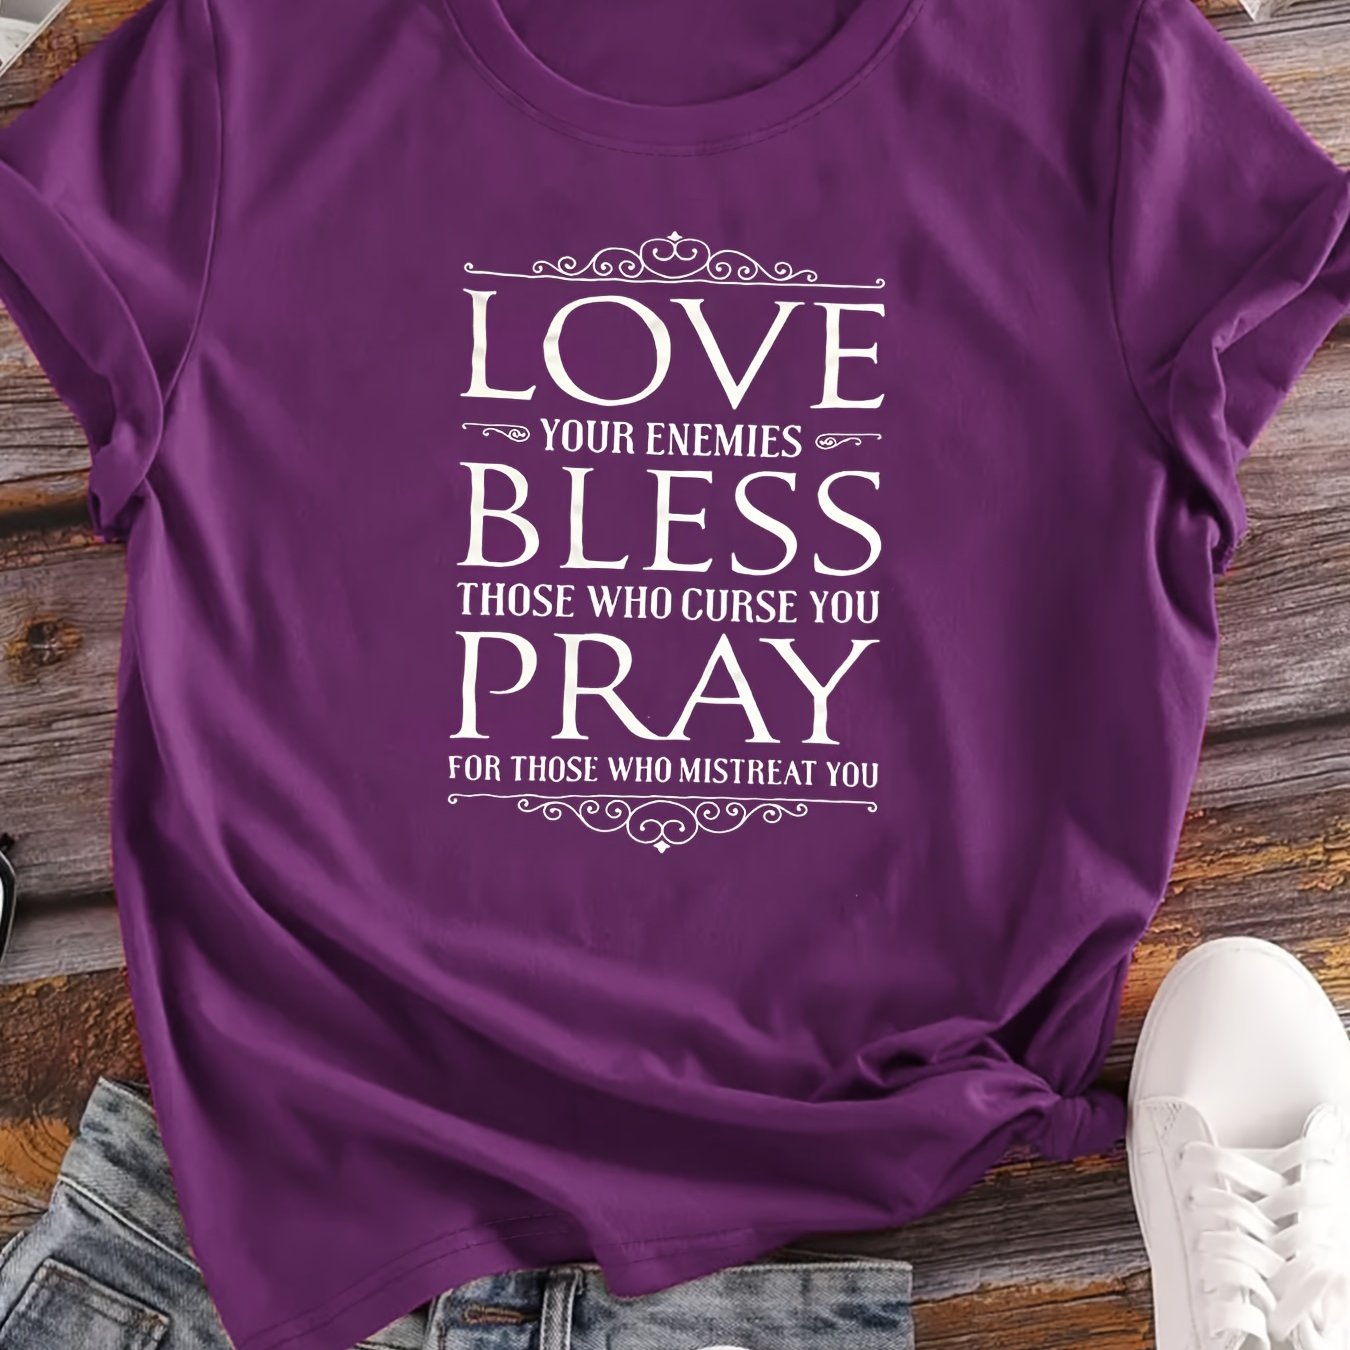 Love Your Enemies Bless Those Who Curse You Pray For Those Who Mistreat You Women's Christian T-shirt claimedbygoddesigns